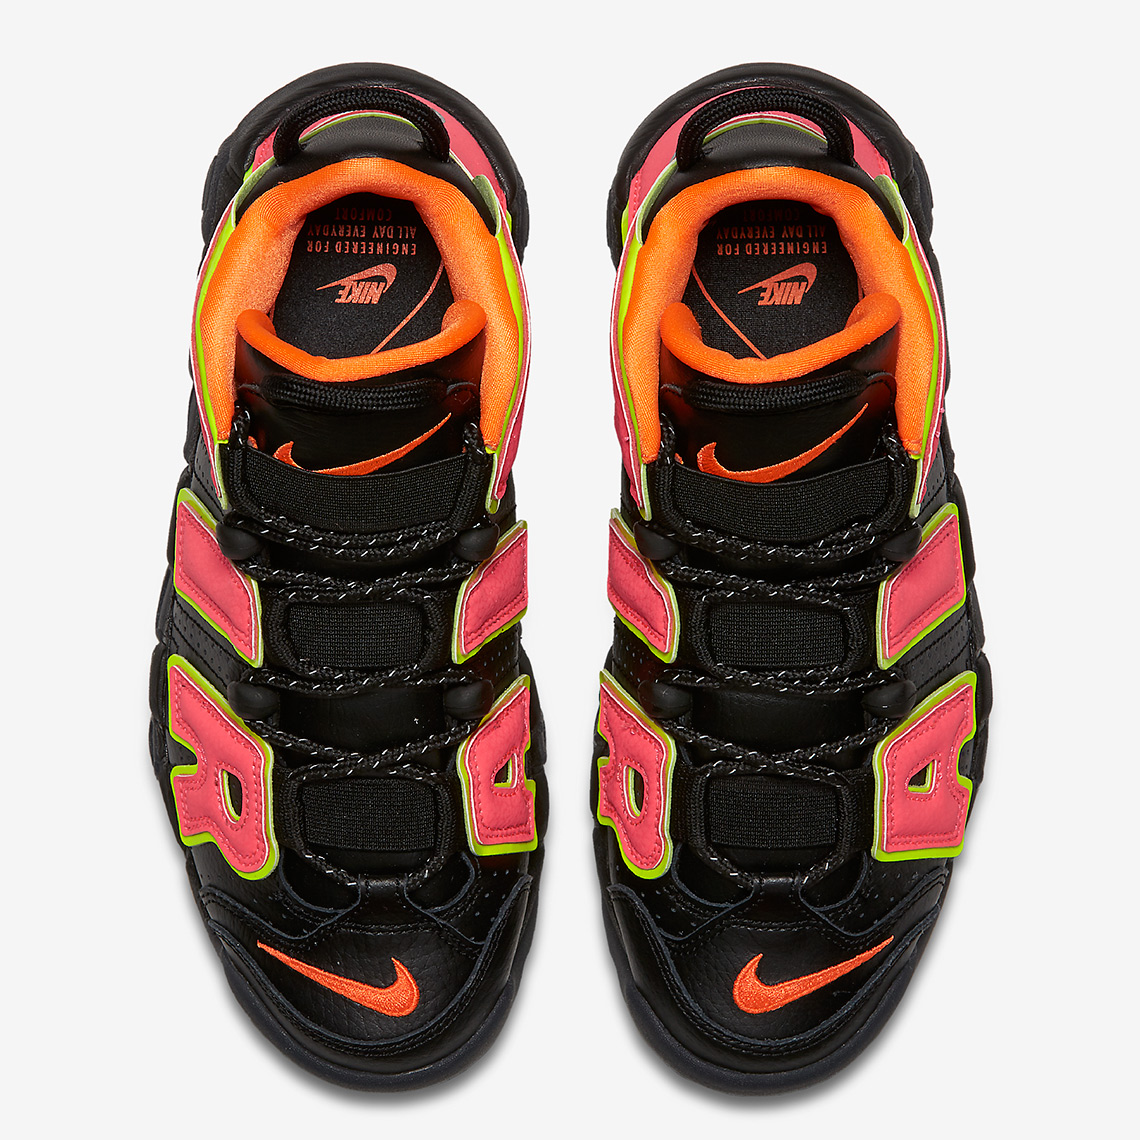 Nike Air More Uptempo Hot Punch Wmns Coming Soon 8